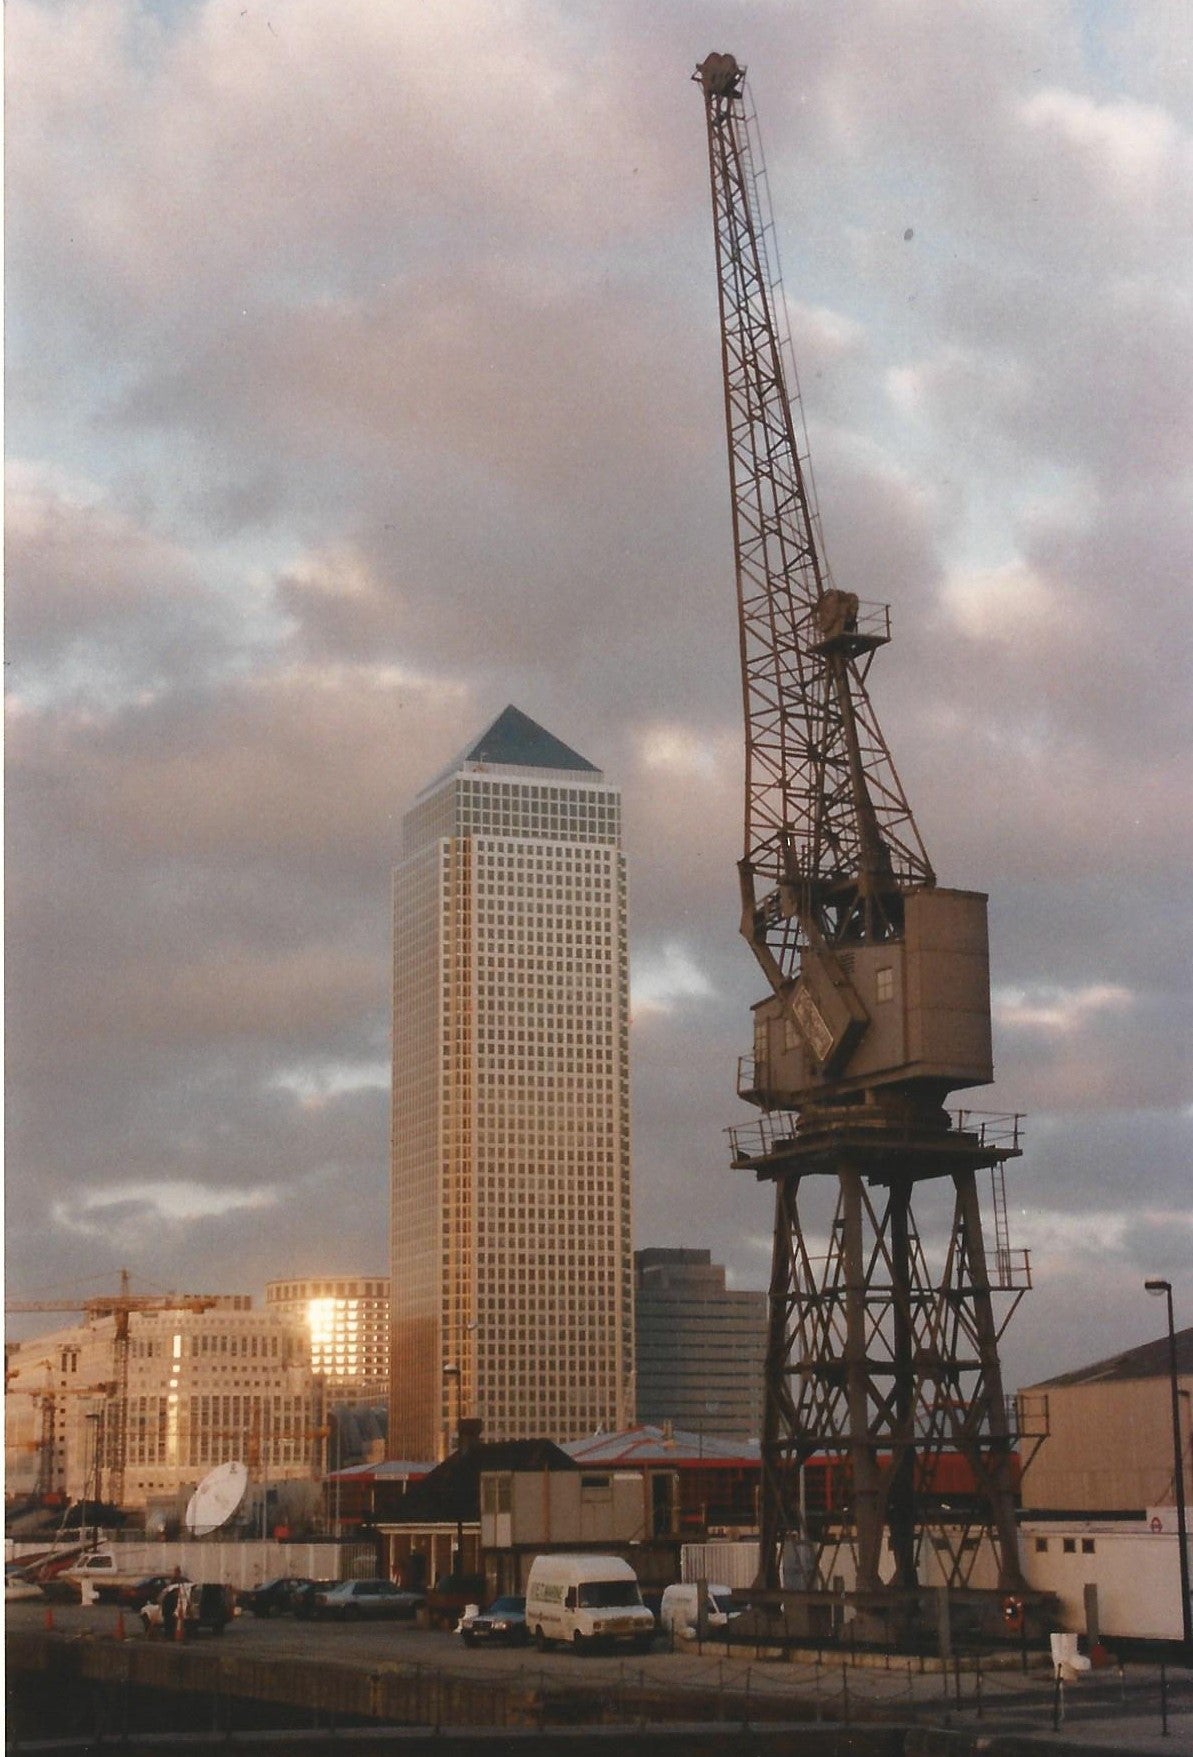 Canary Wharf and crane photograph by Reginald Beer